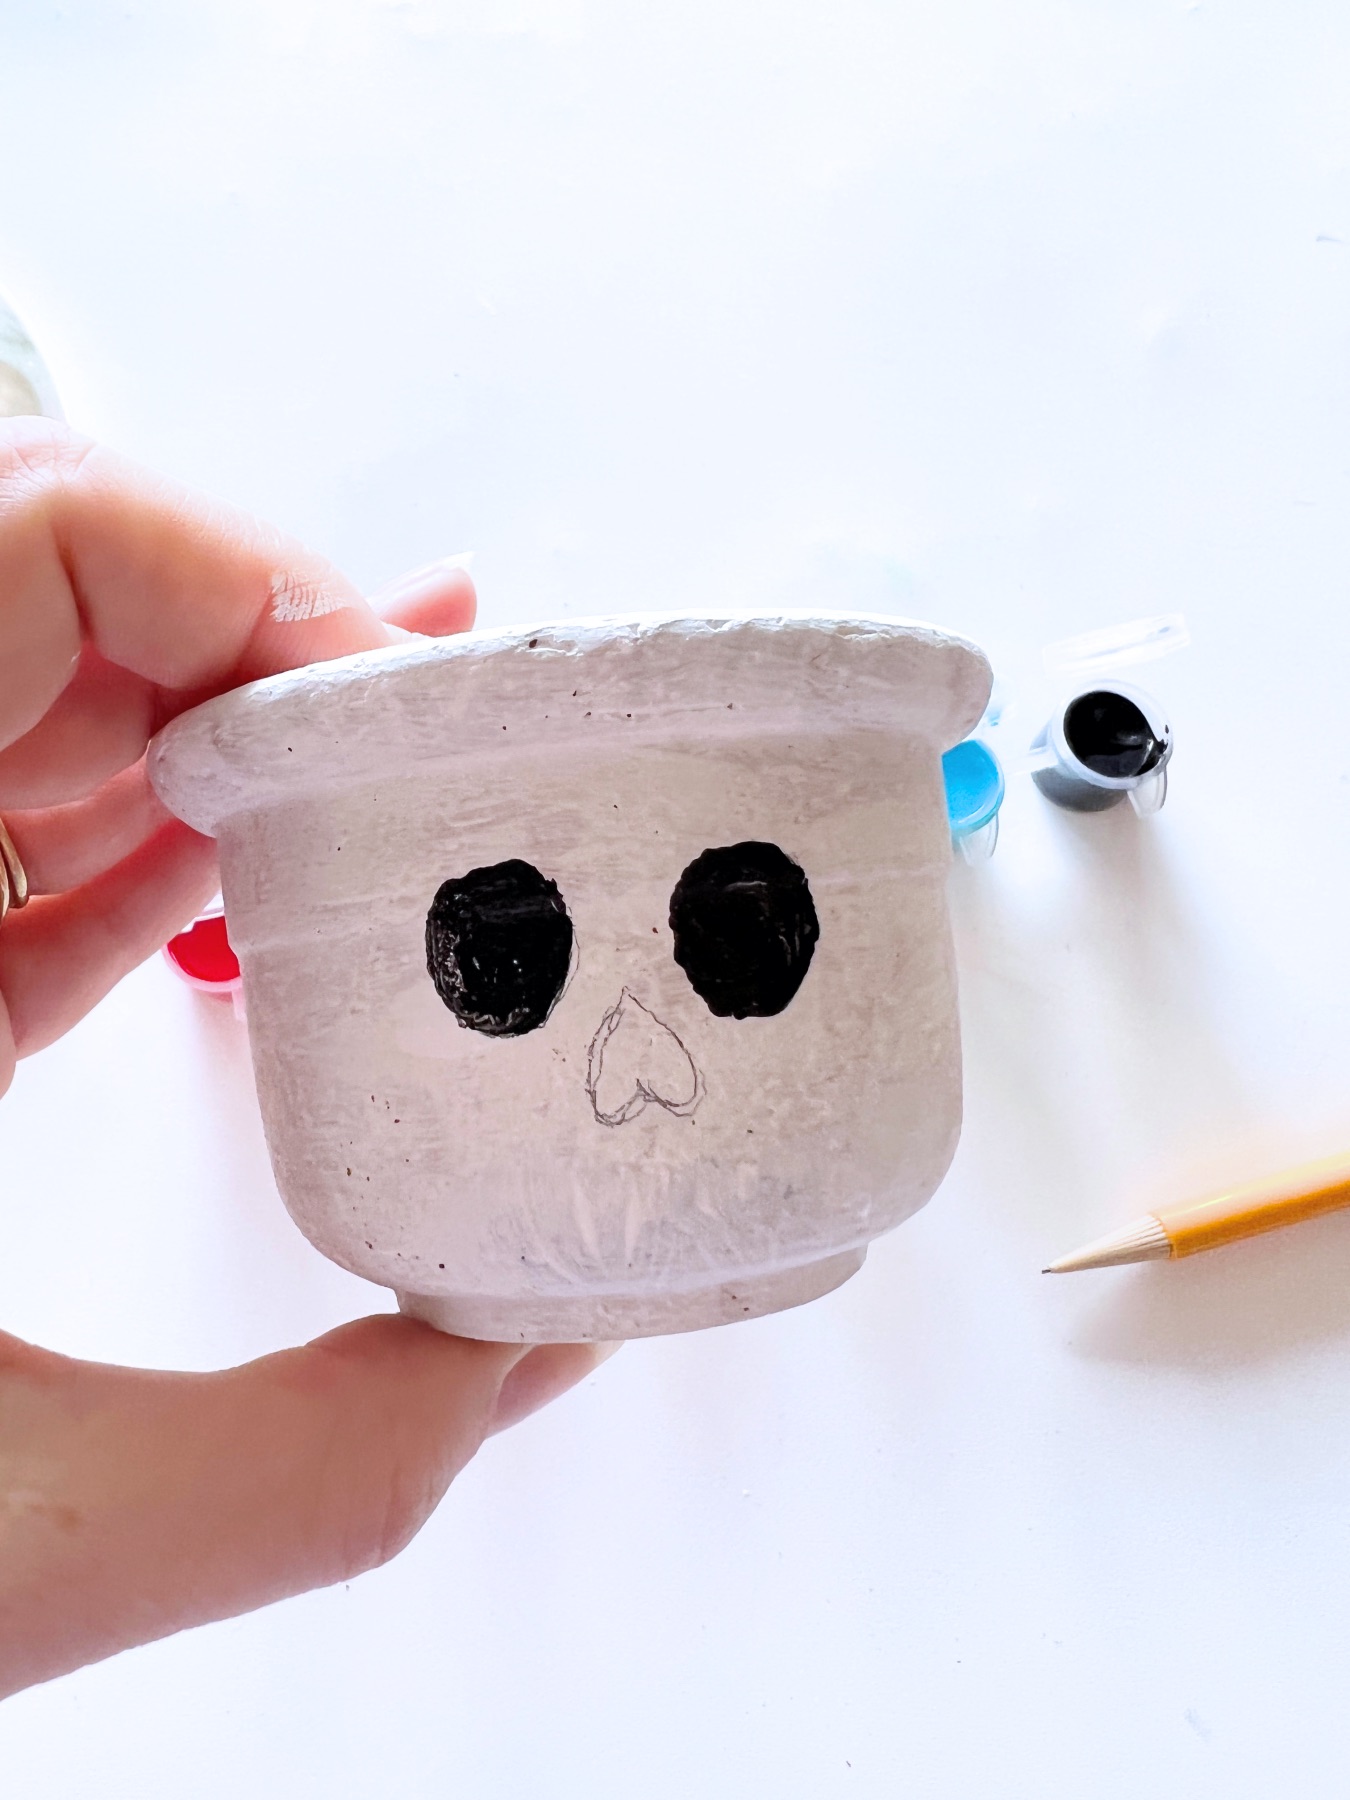 paint in the eyes of the sugar skull planter